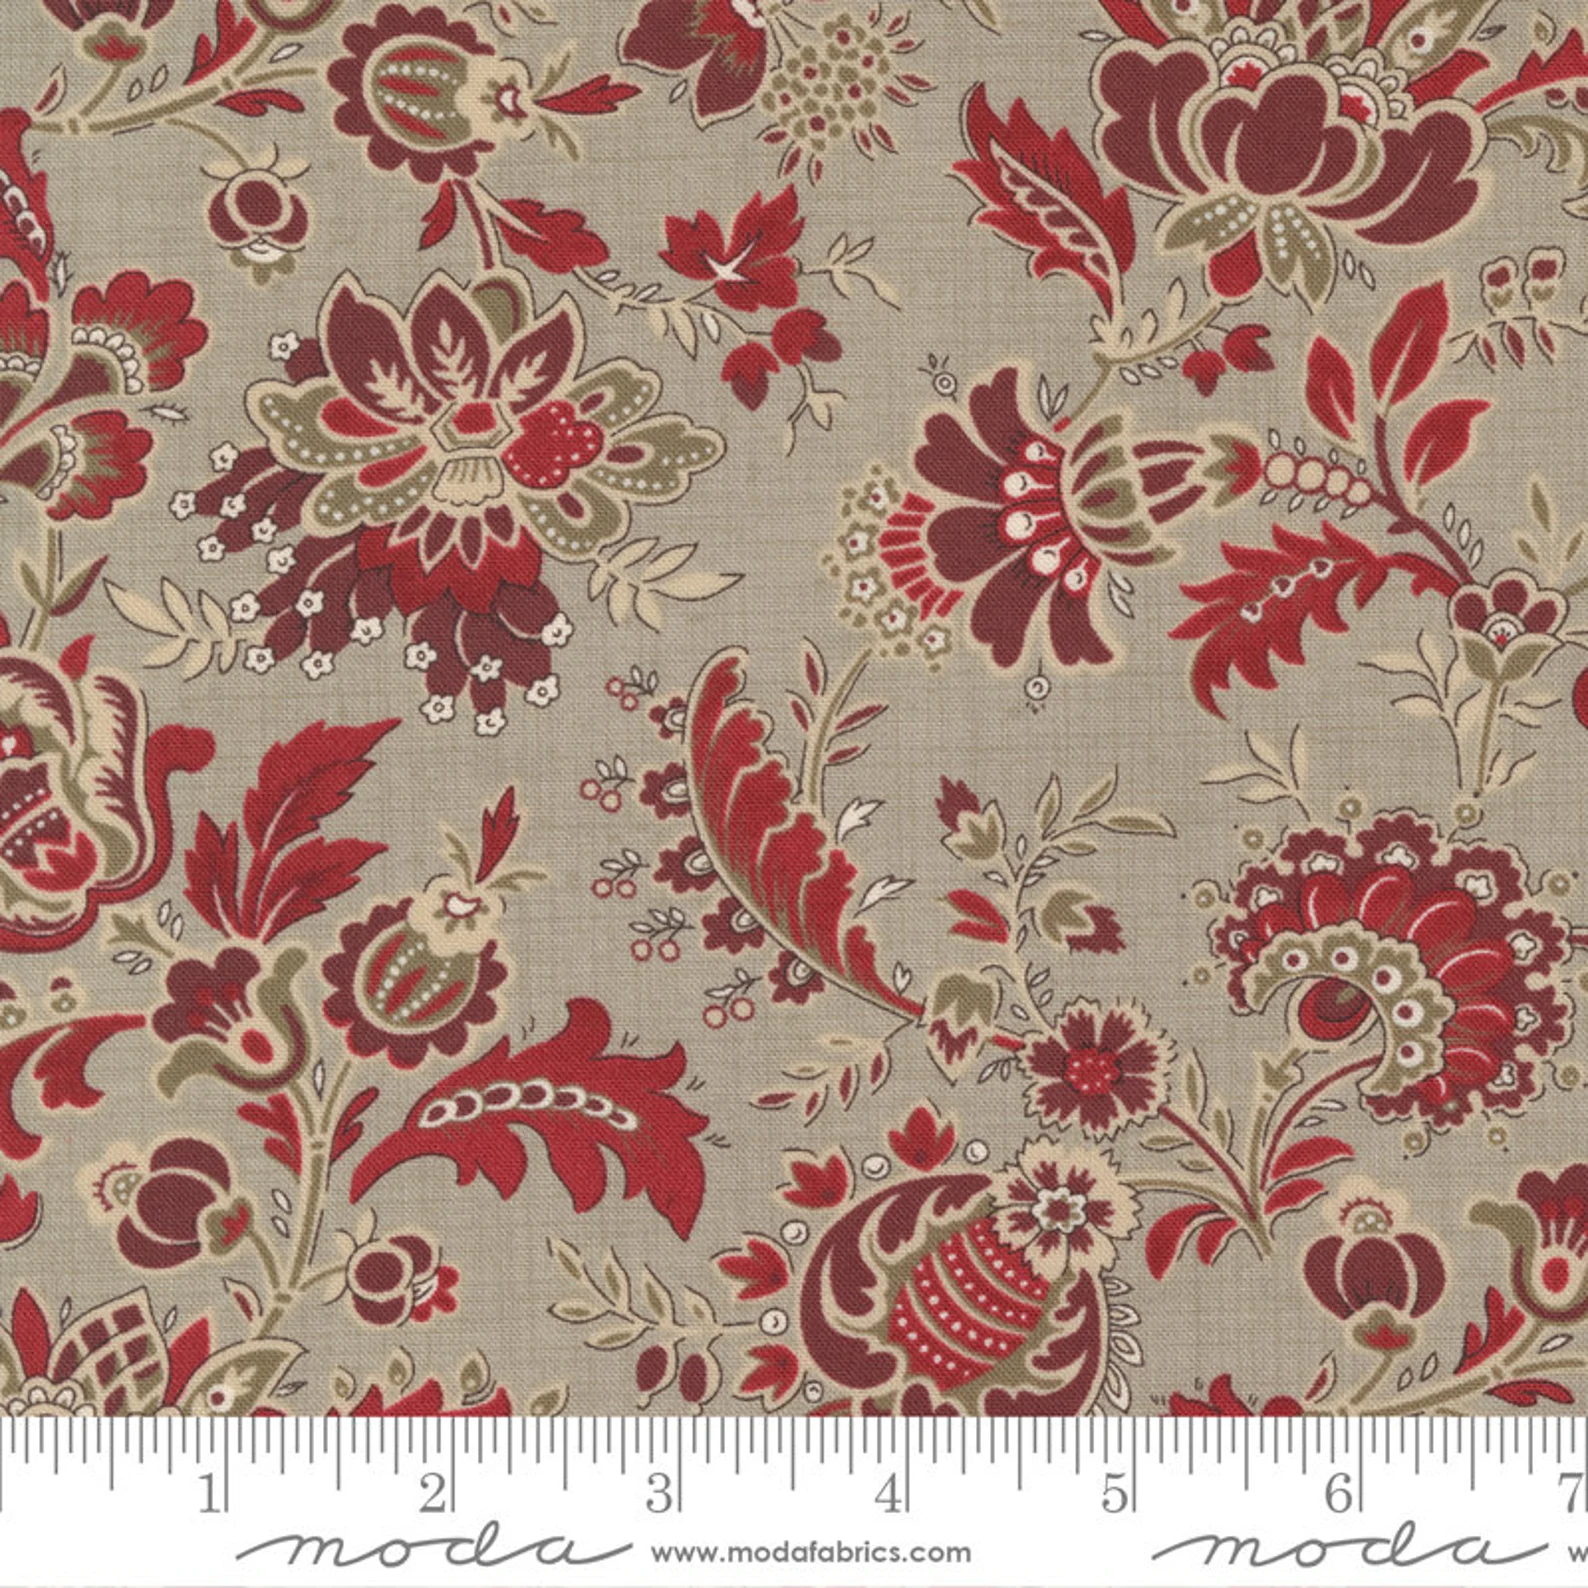 Moda French General Bonheur De Jour Floral Roche Taupe Brown with Red Flowers 13911-18